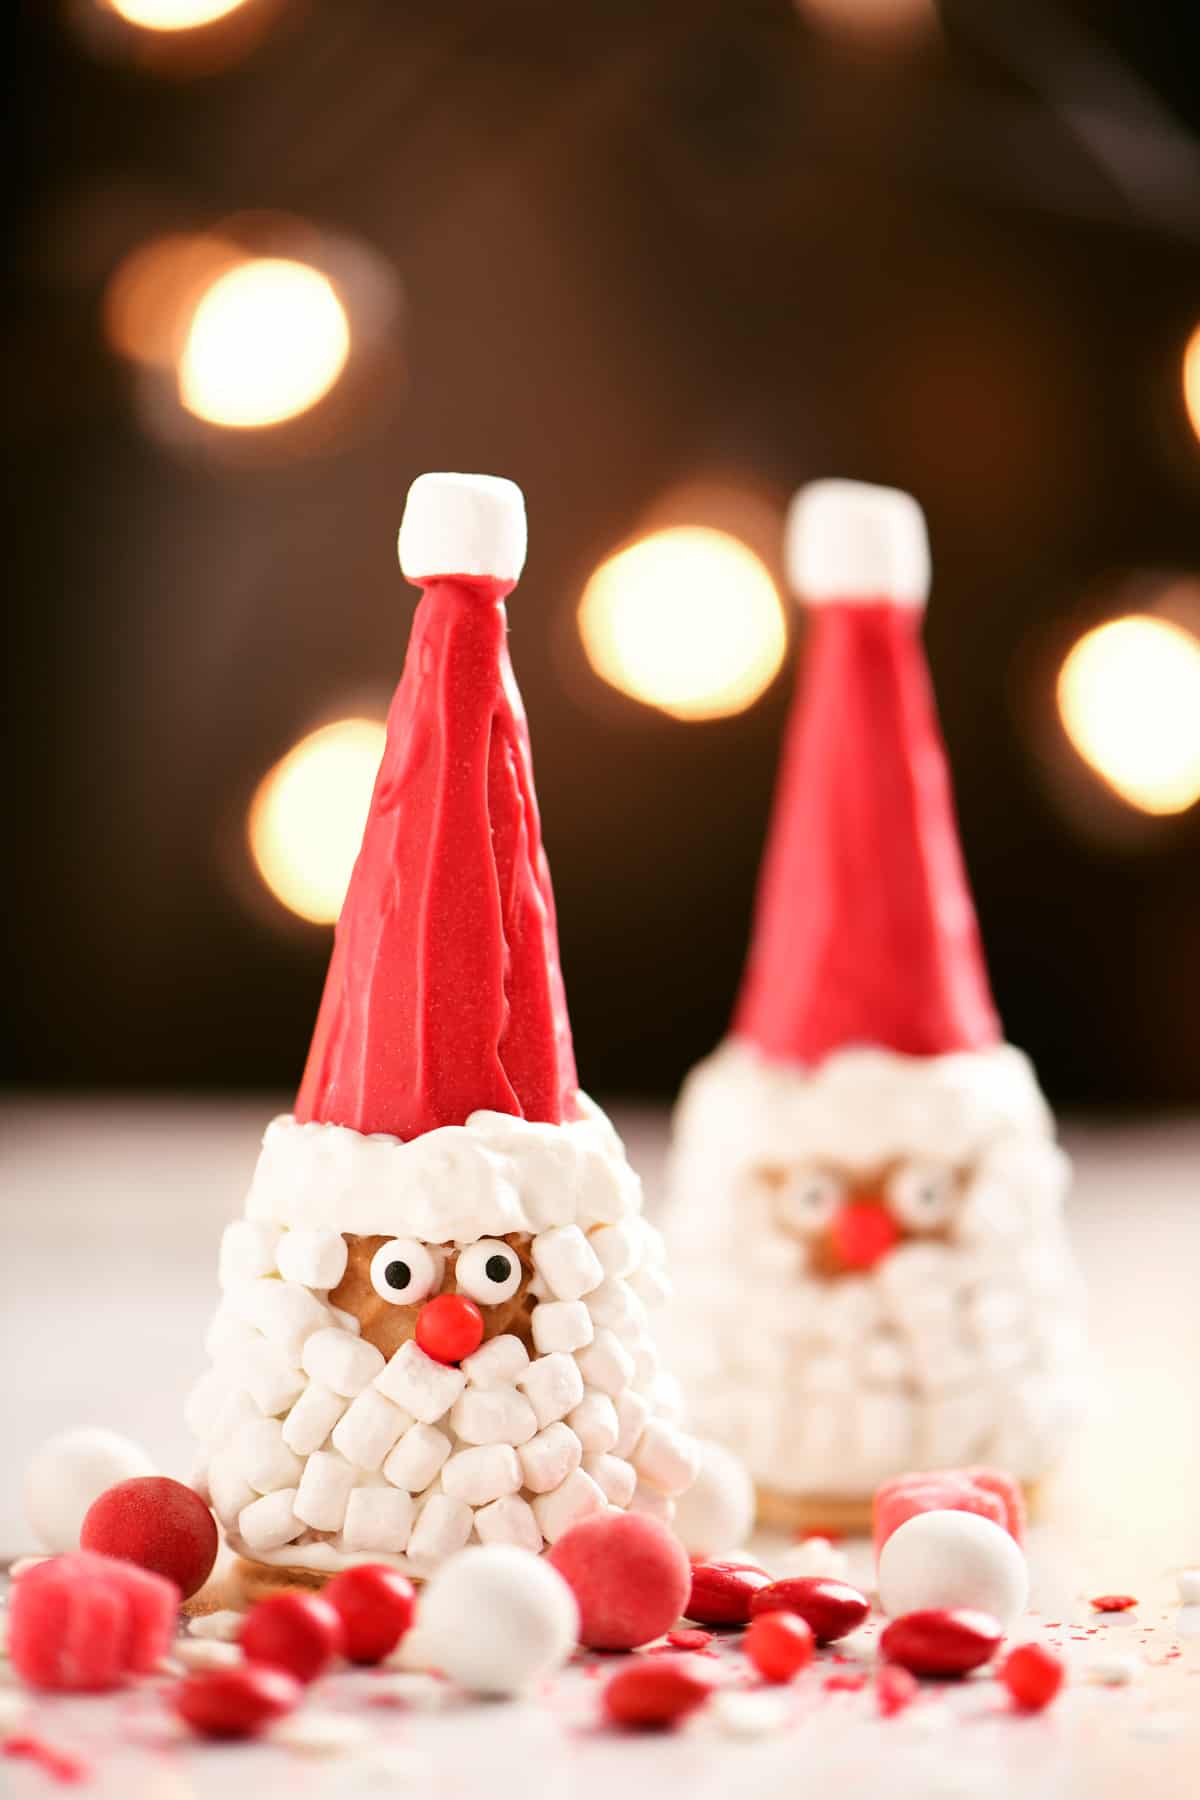 Santa Christmas cones and red and white candies on a table